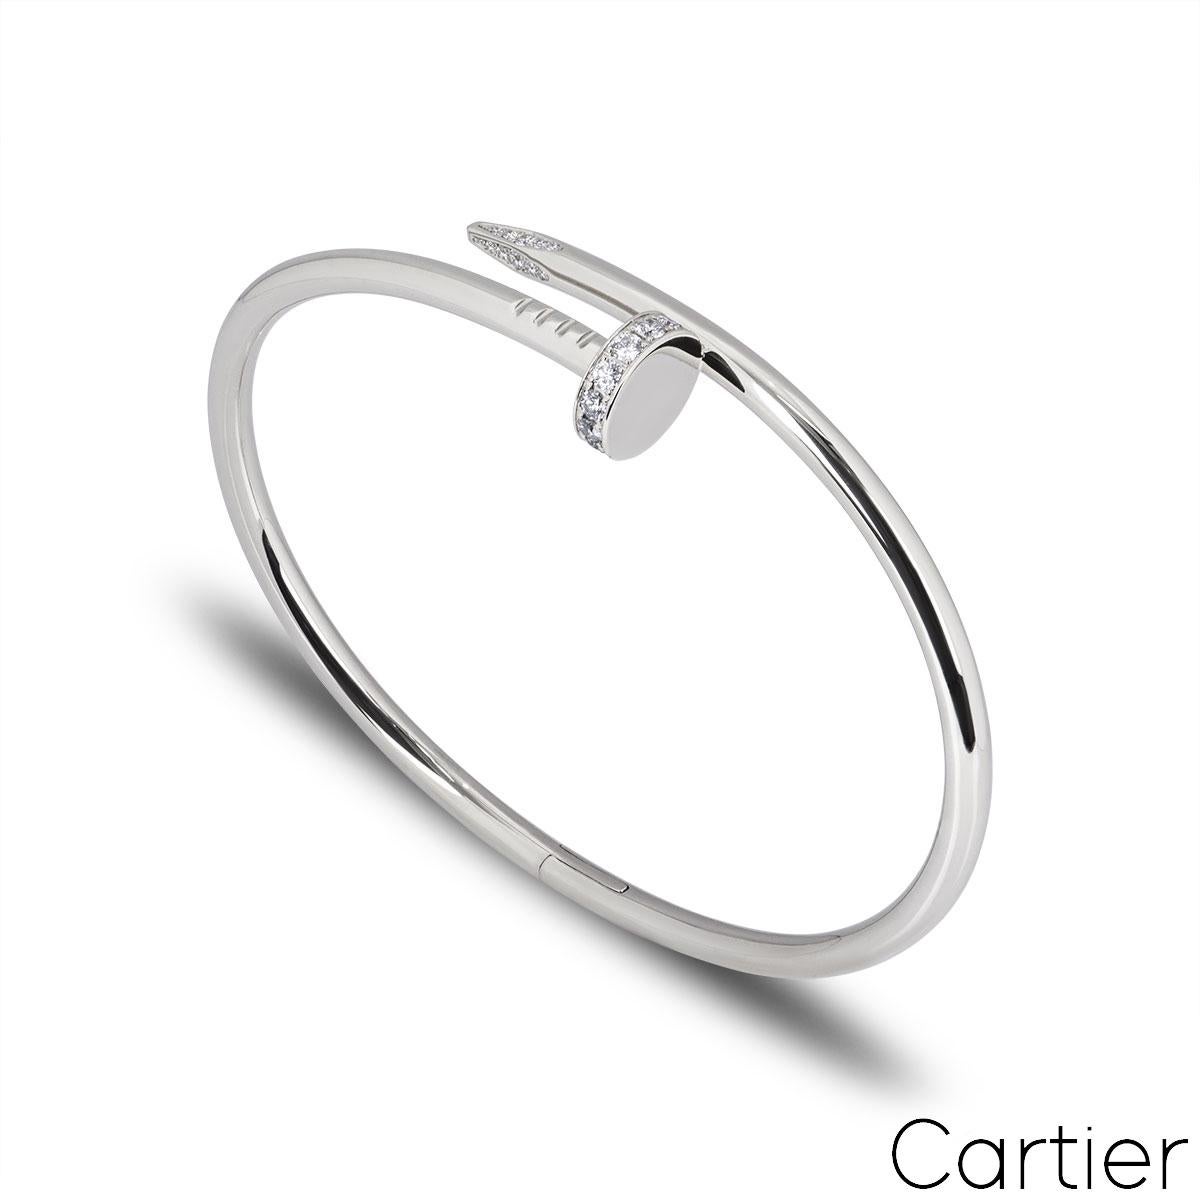 An 18k white gold diamond bracelet by Cartier from the Juste Un Clou collection. The bracelet is in the style of a nail and has 27 round brilliant cut pave diamonds set in the head and tip, totalling 0.54ct. The diamonds are predominantly F colour